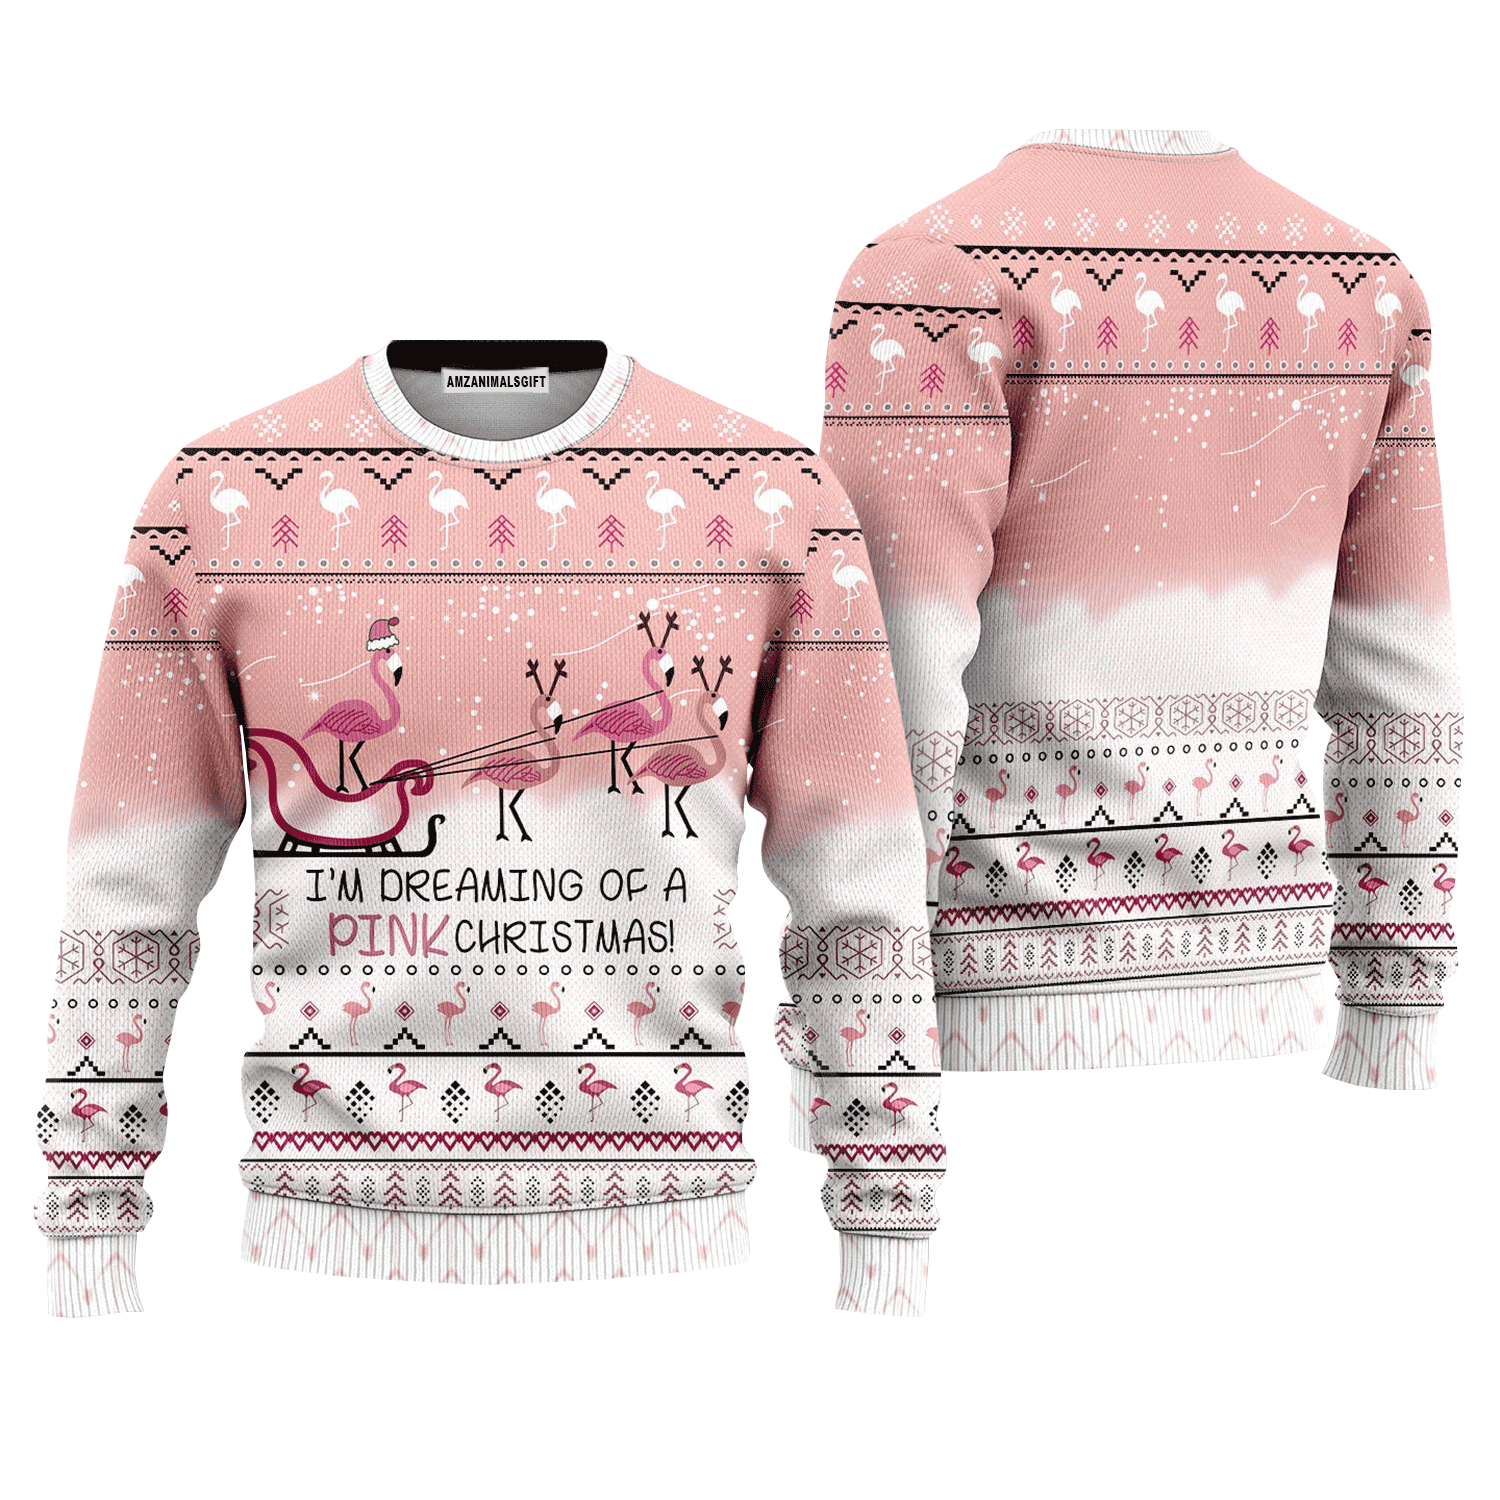 Flamingo Dream Sweater I'm Deraming Of A Pink Christmas, Ugly Sweater For Men & Women, Perfect Outfit For Christmas New Year Autumn Winter